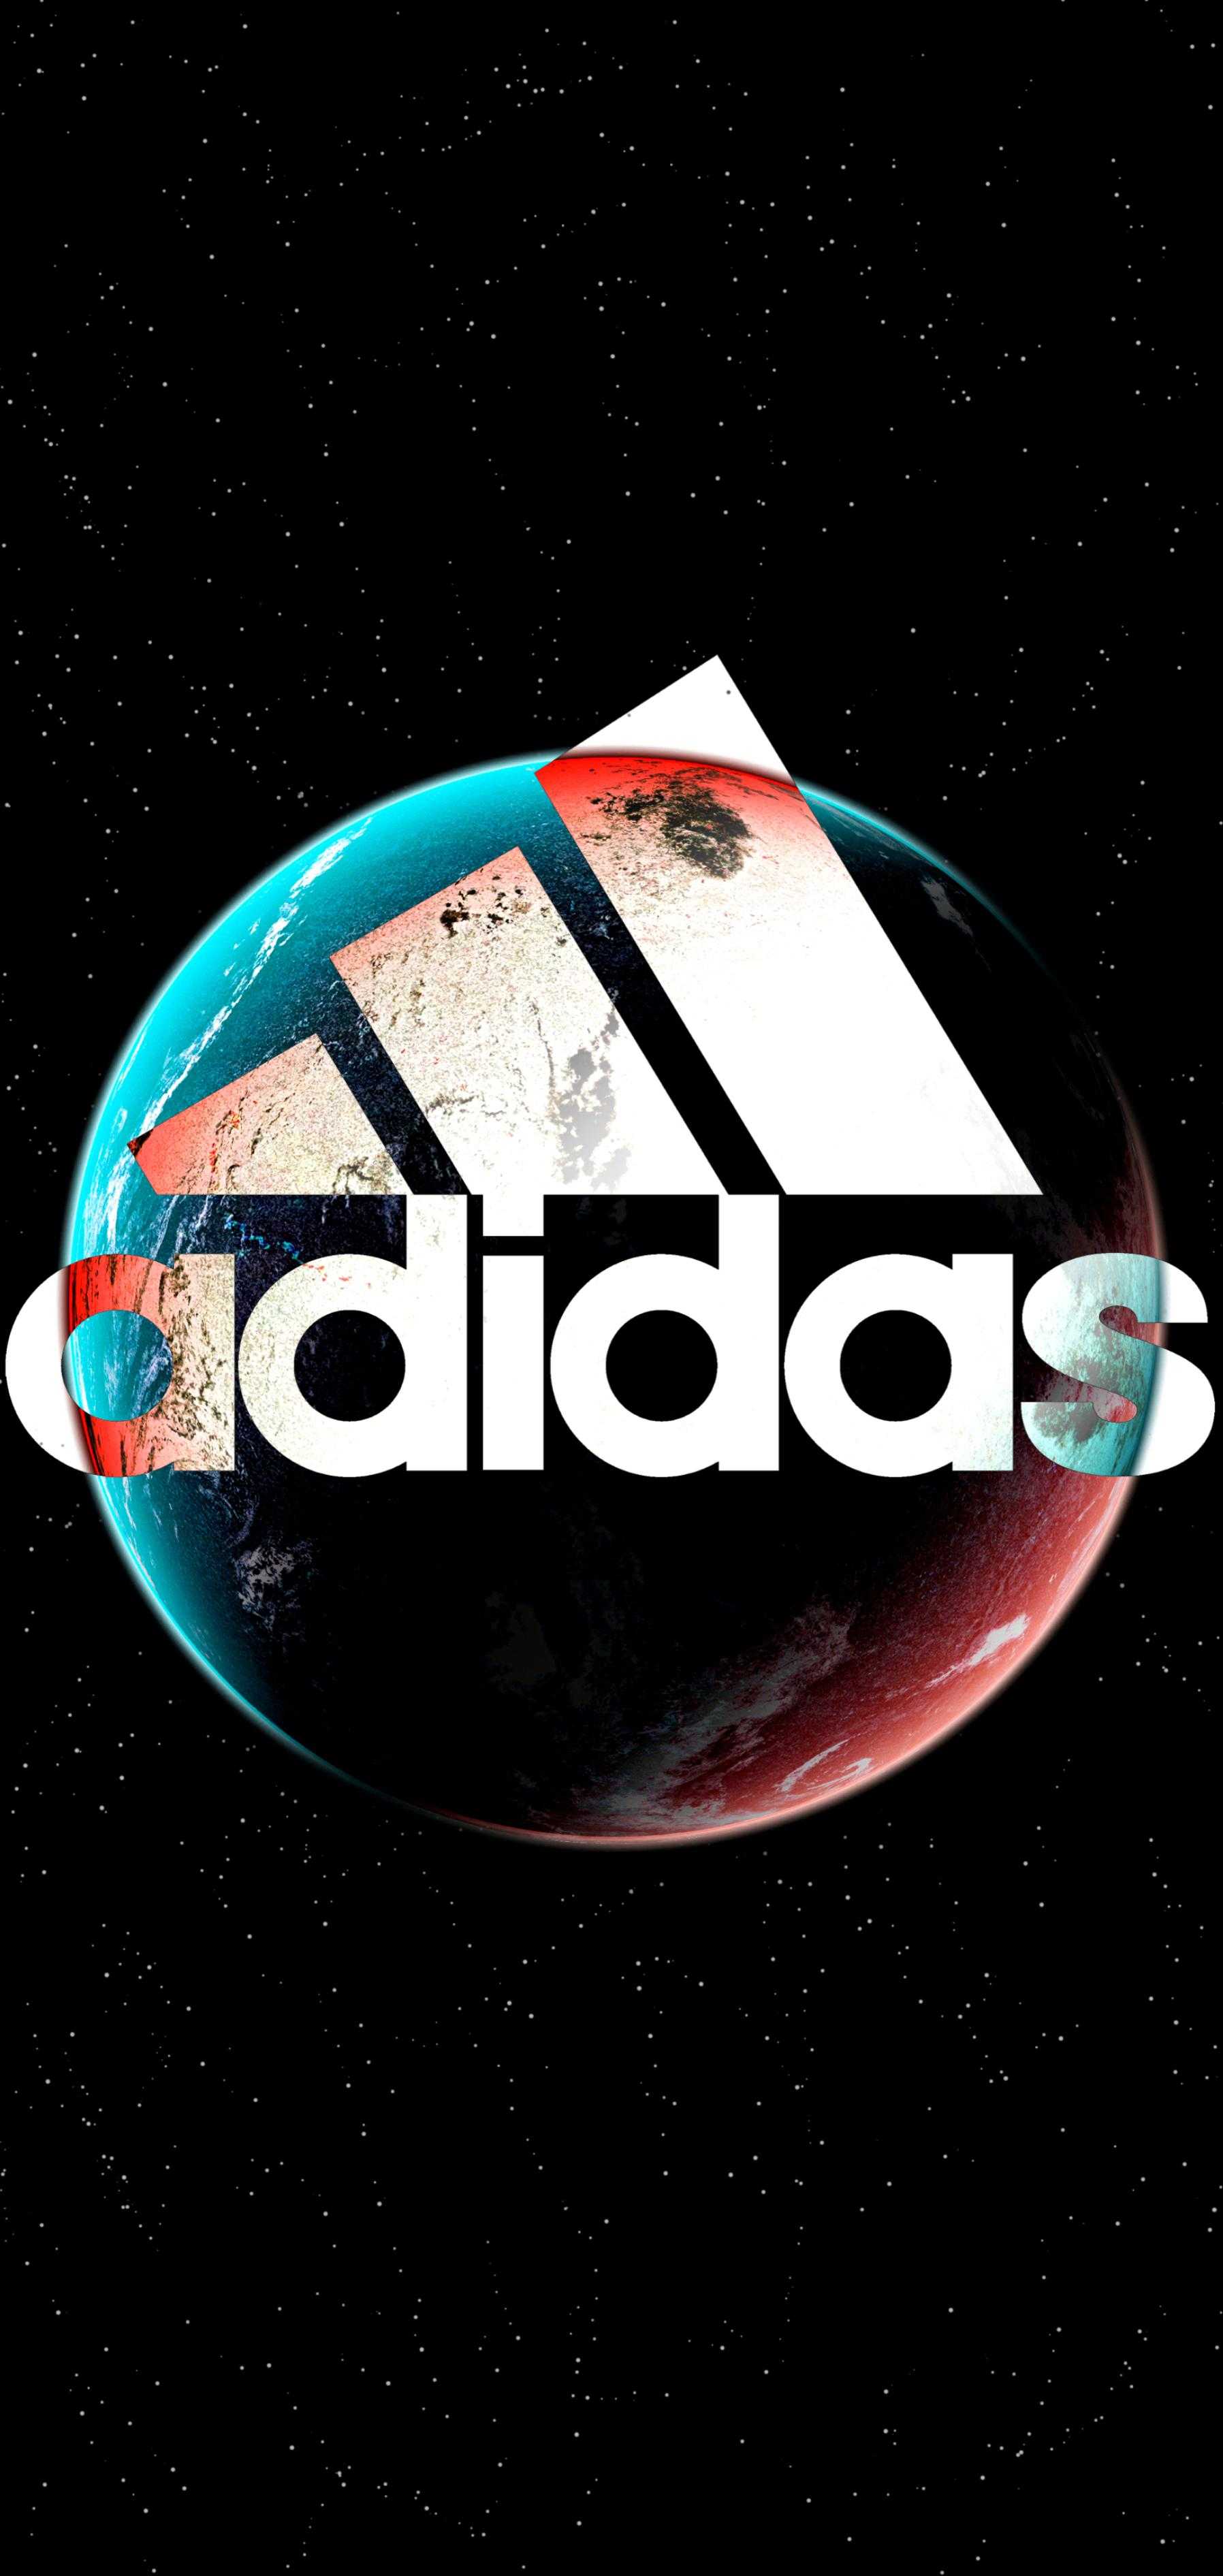 Adidas wallpaper for iPhone and Android. - Planet, Adidas